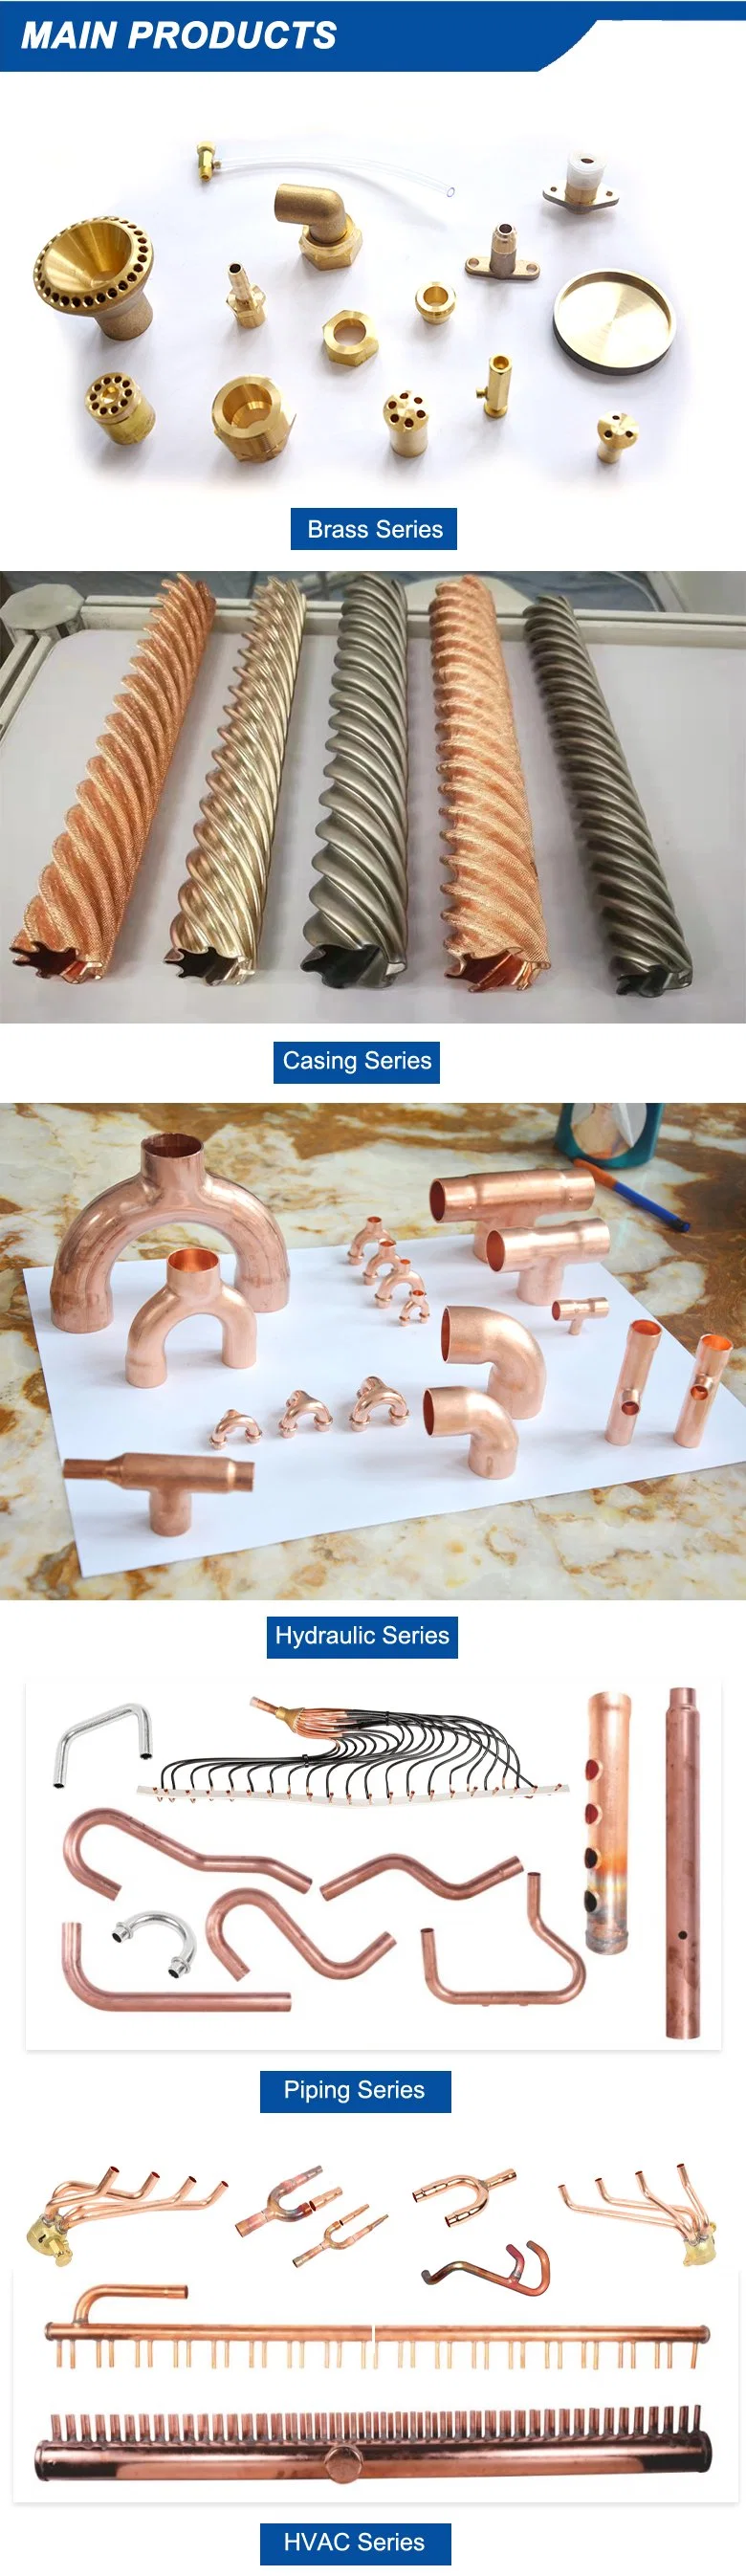 HVAC Copper Fittings, Air Conditioner Parts, Air Conditioners Internal Cooling Muffler